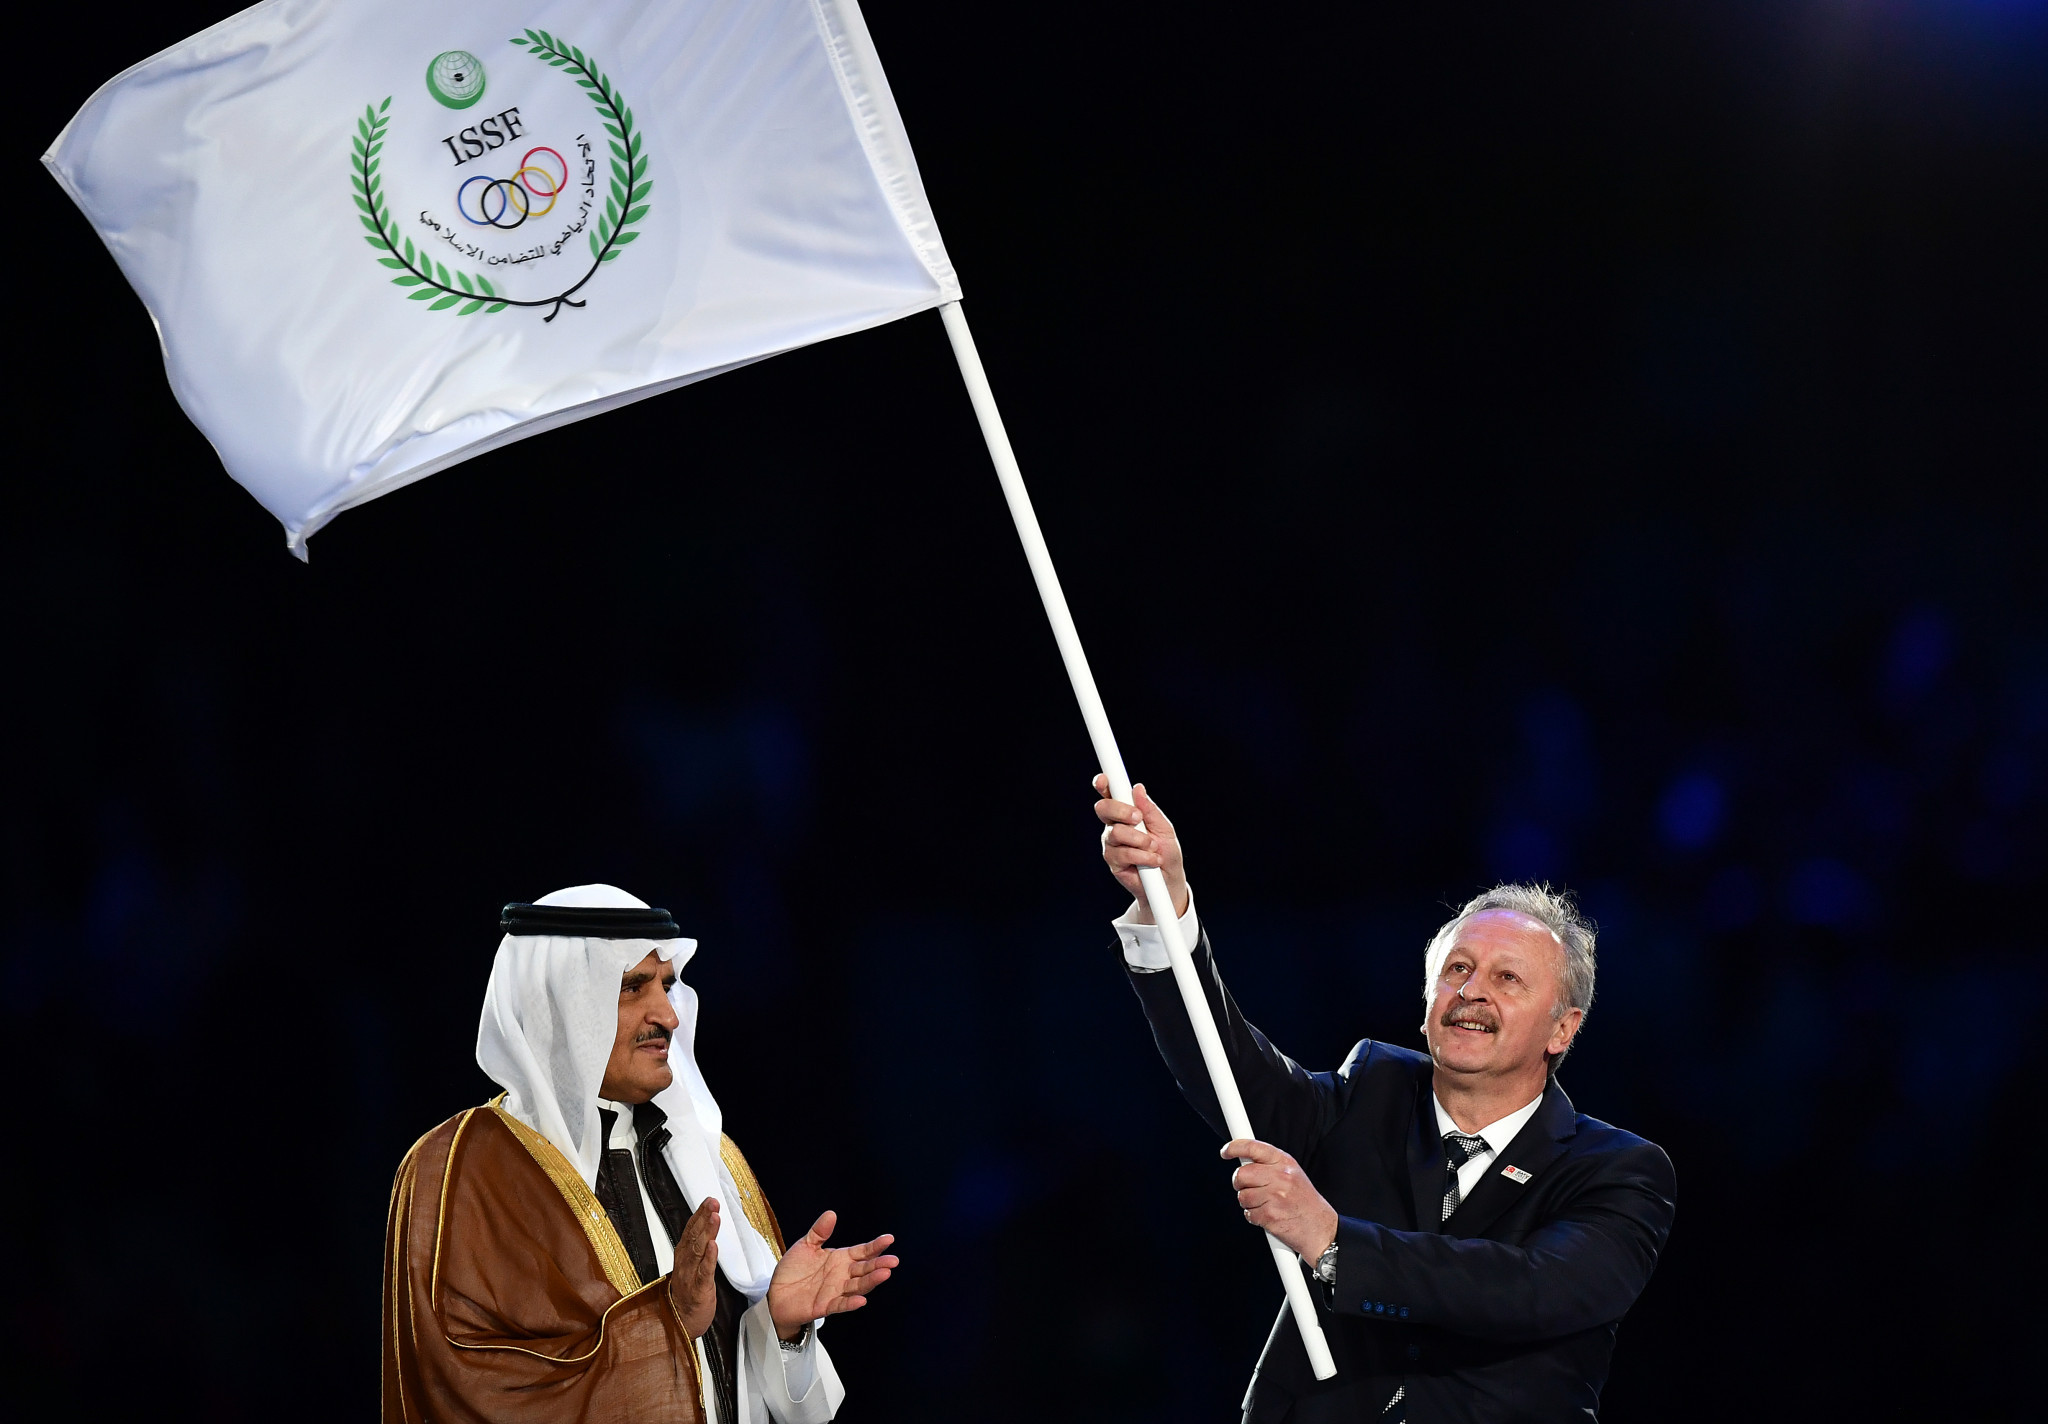 Kadir Topbas, who was Mayor of Istanbul at the time, waves the Islamic Solidarity Sports Federation flag ©Getty Images